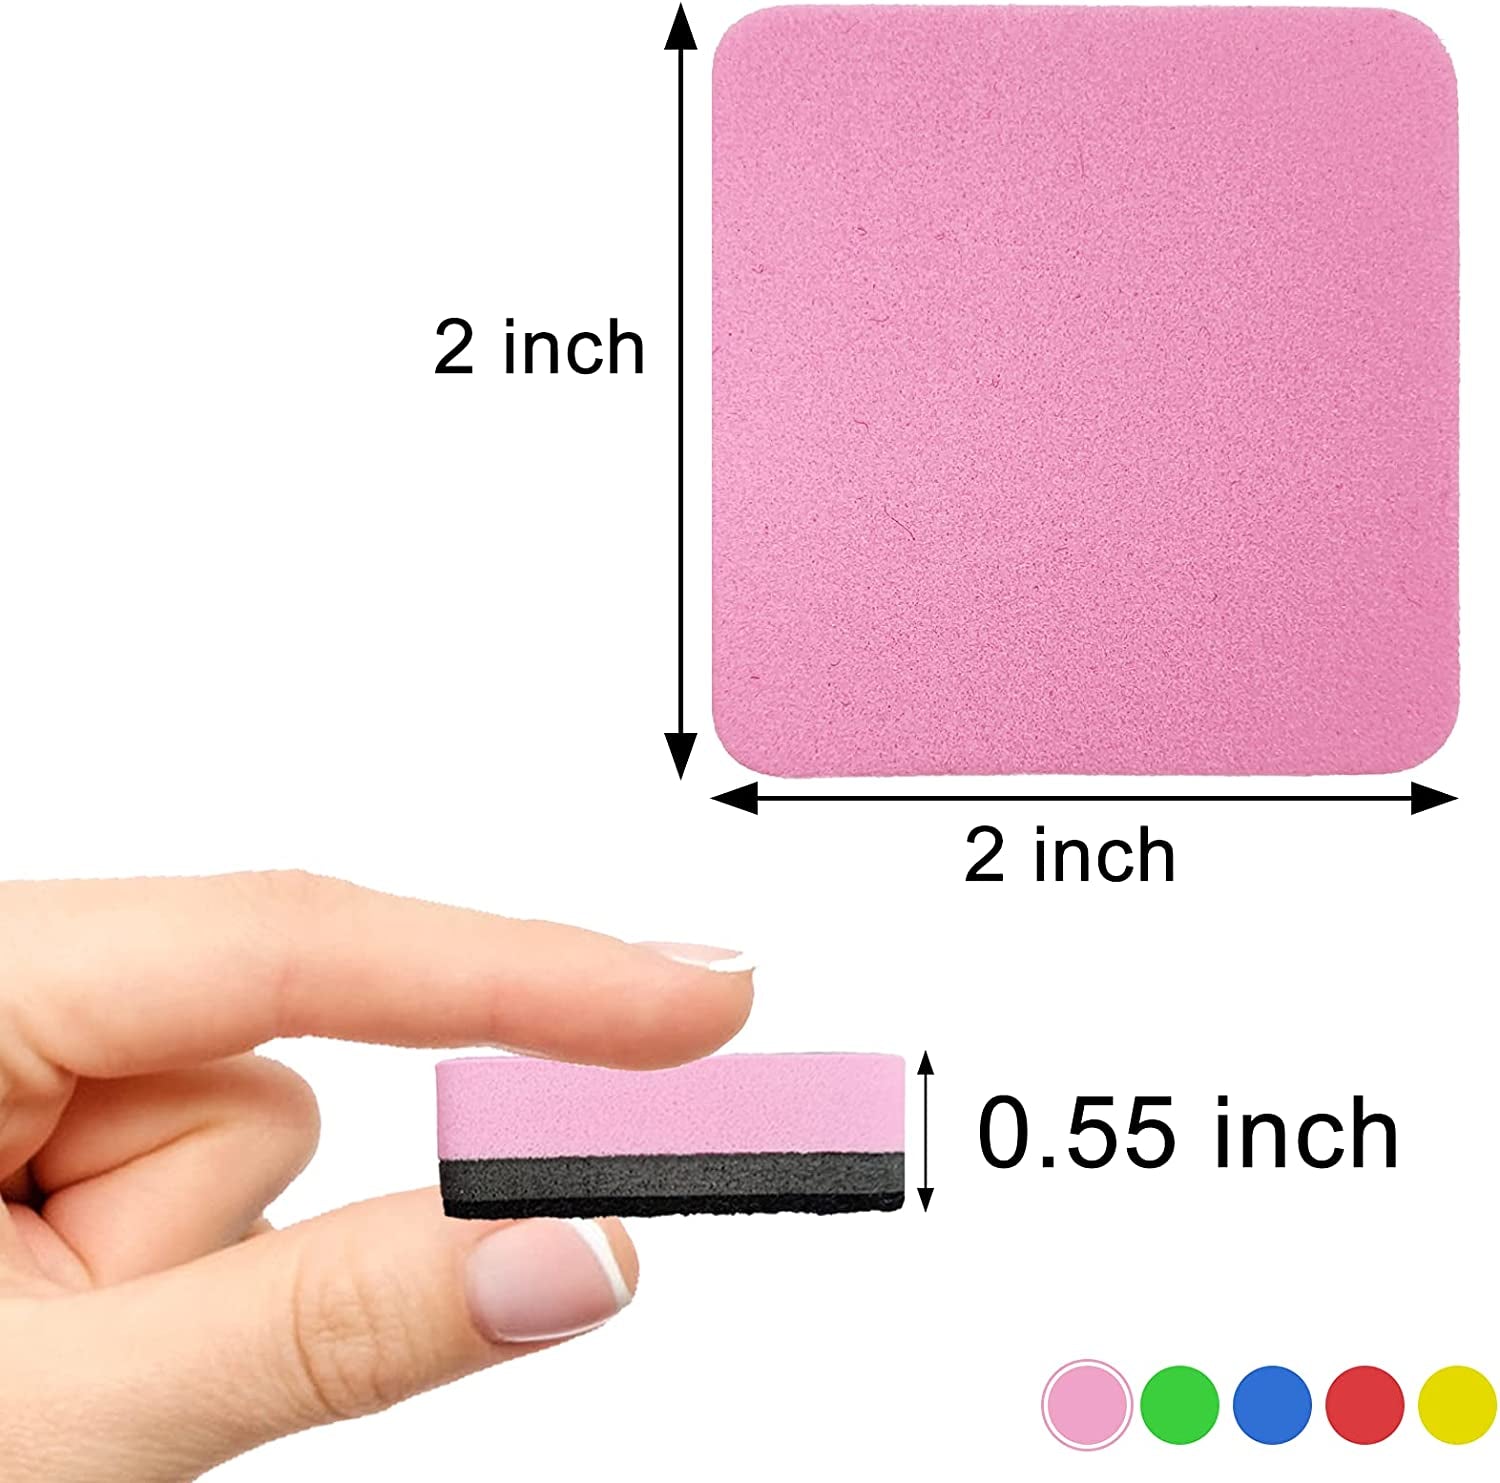 30 Pack Whiteboard Eraser for Kids and Adults, Magnetic Whiteboard Eraser for Cleaning Dry Erase Markers on Magnetic Soft Whiteboard, Glass Whiteboard and Dry Erase Board